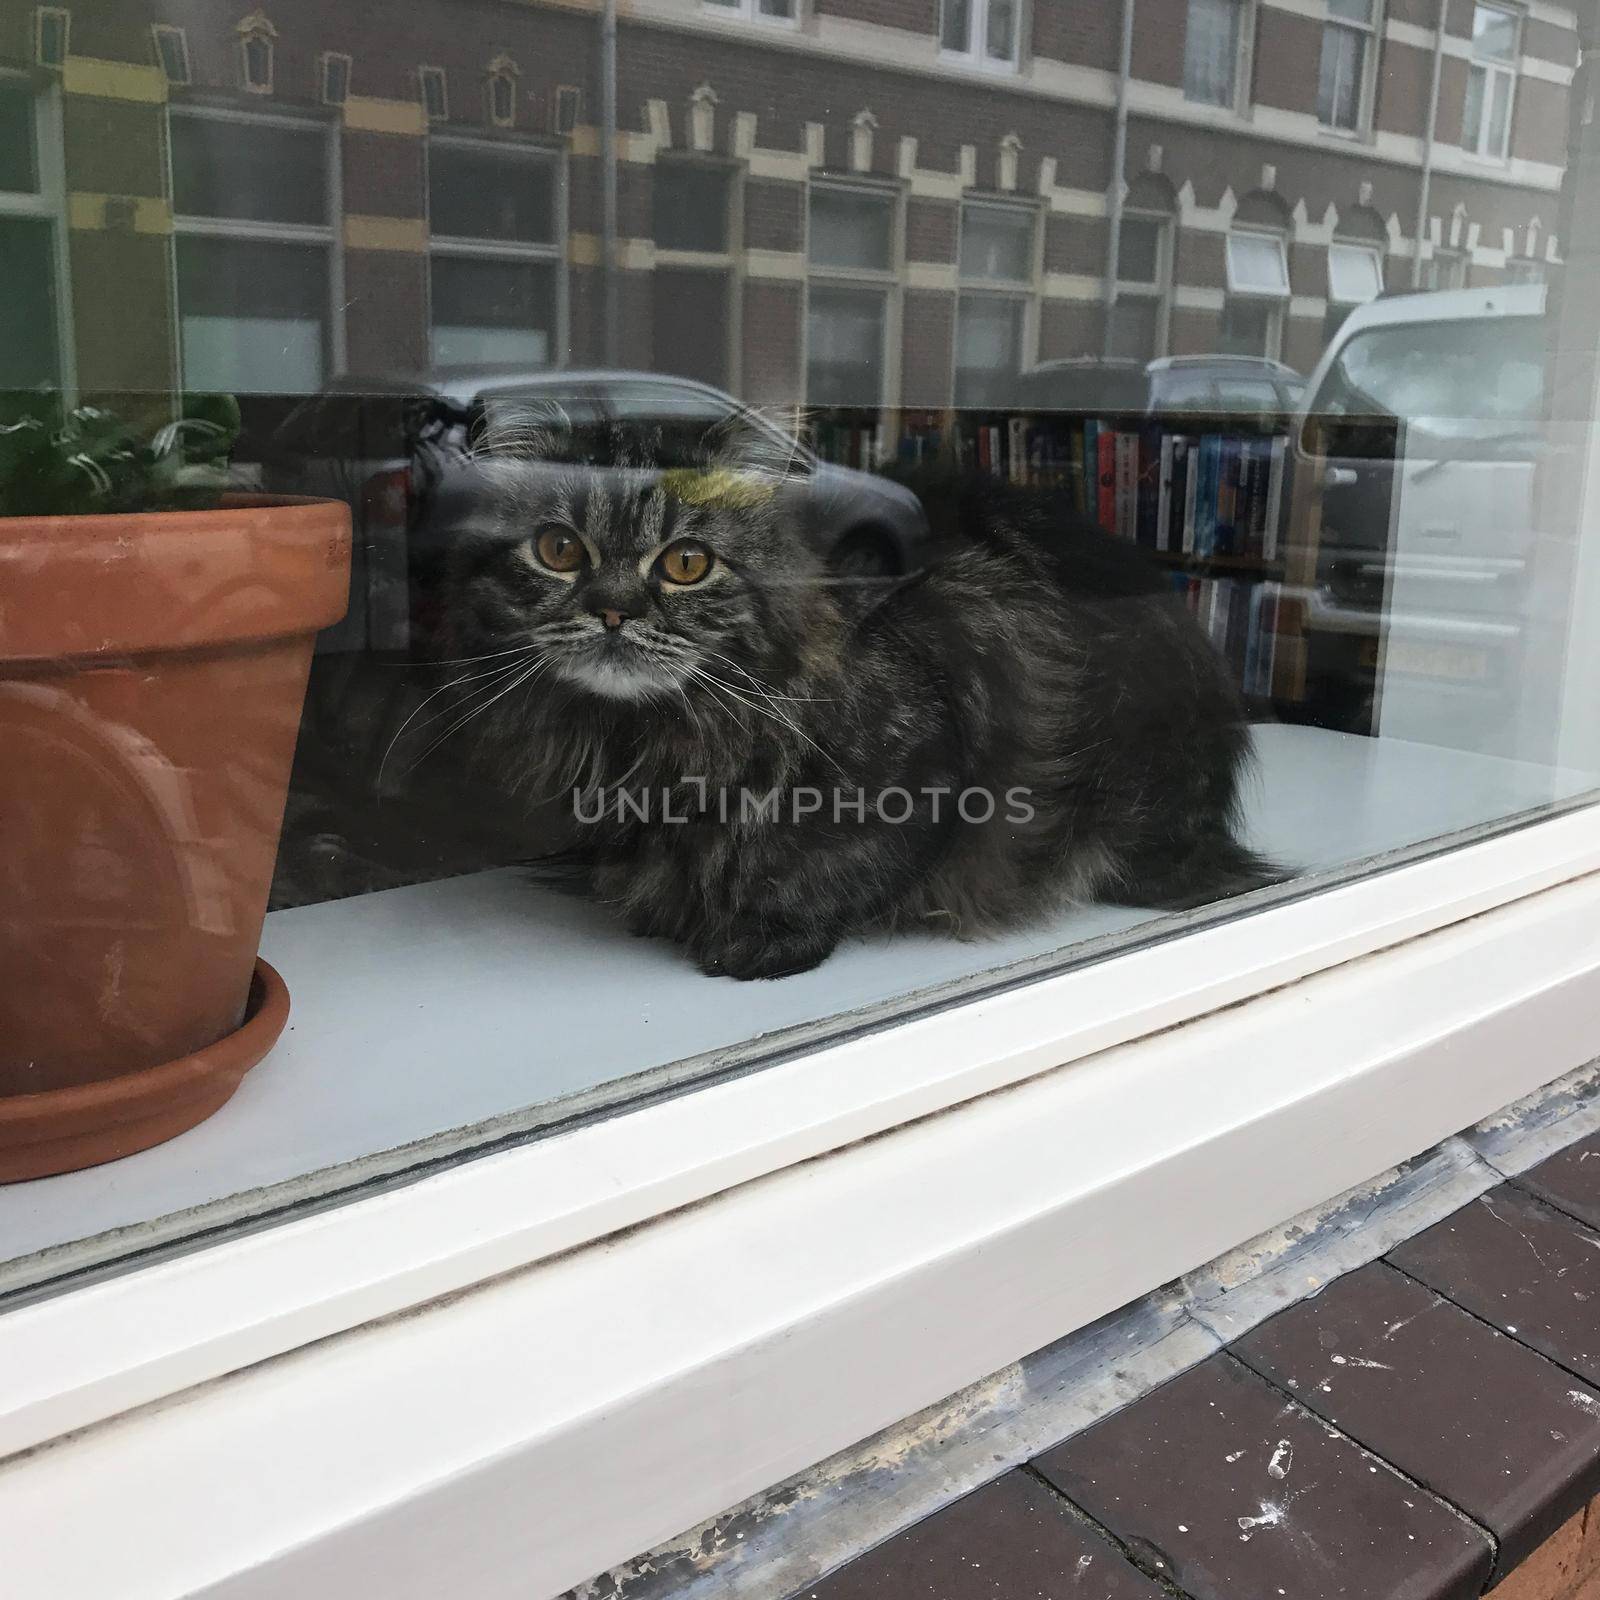 a Tabby cat sitting behind a window showing reflections of the street